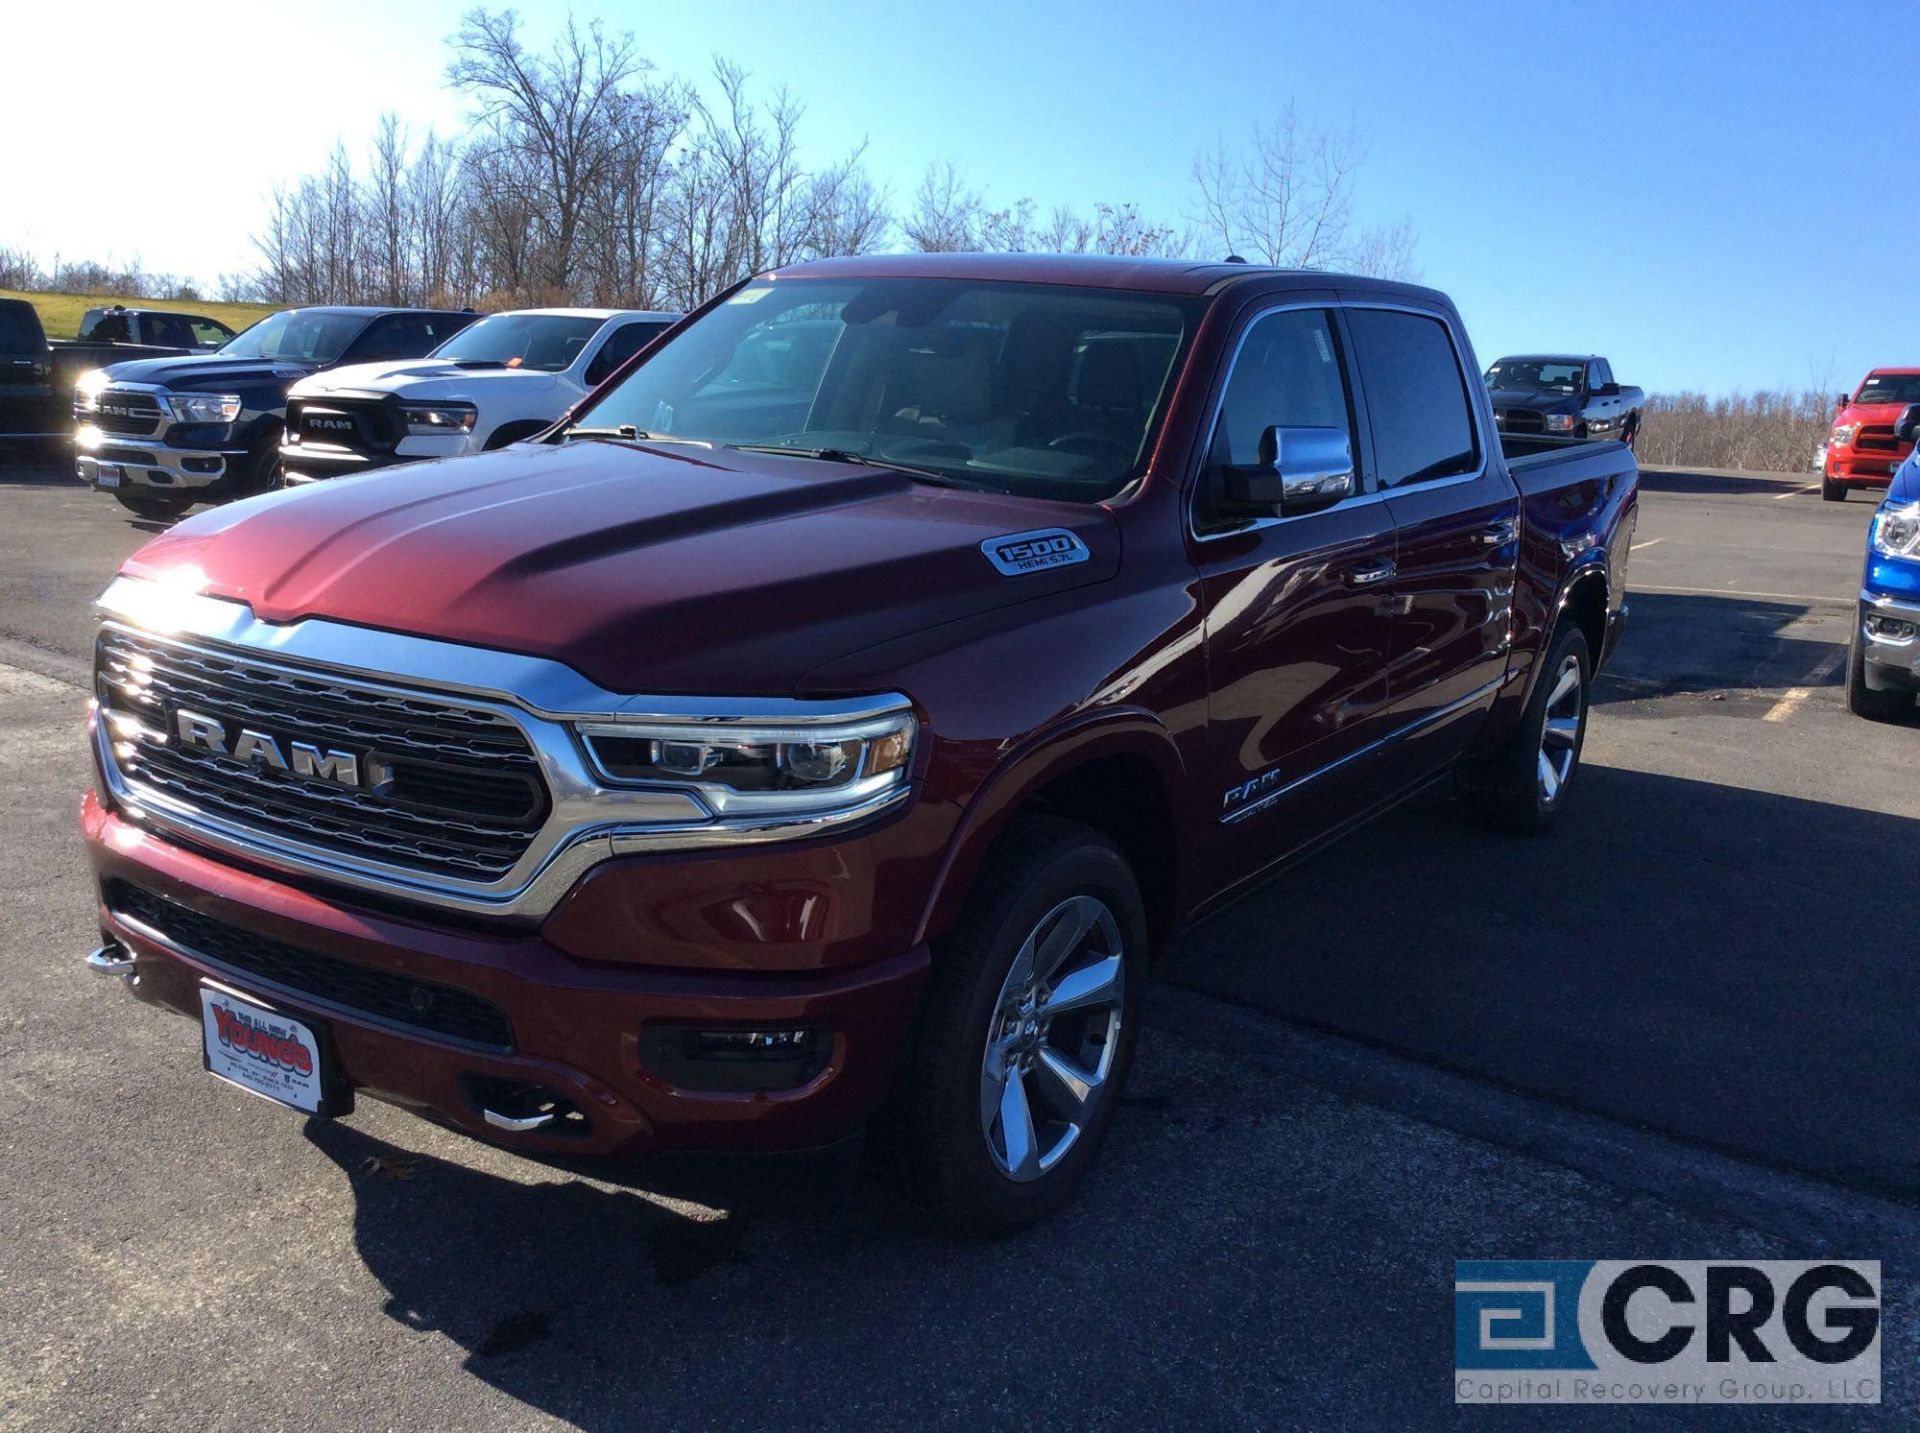 2019 Ram 1500 Limited, with Hemi 5.7L power package, 4WD, power windows, locks, drivers seat, side - Image 3 of 11